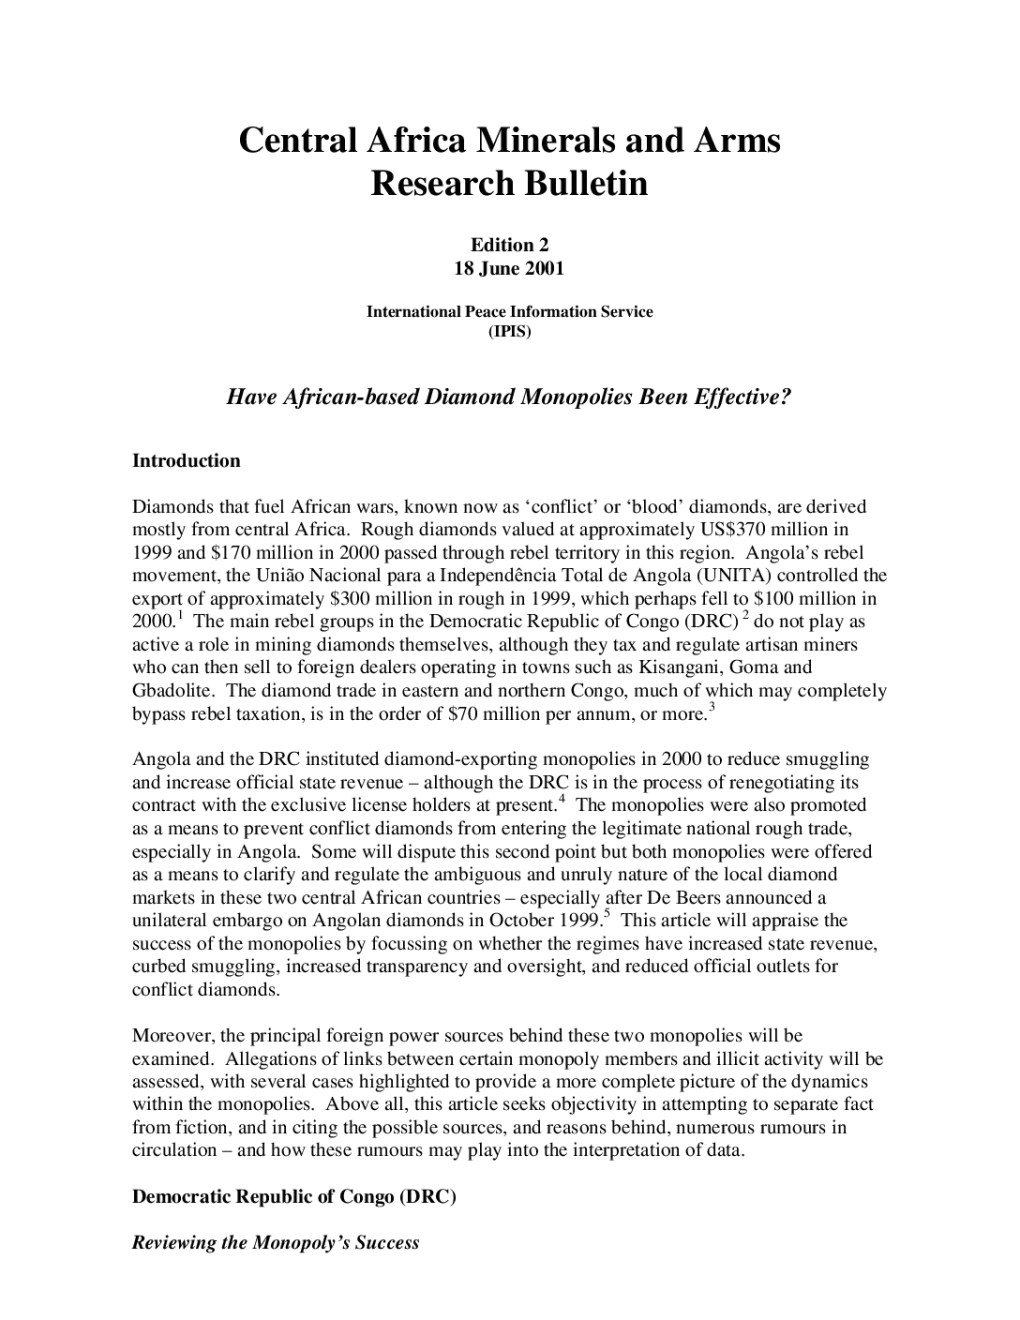 Central Africa Minerals and Arms Research Bulletin